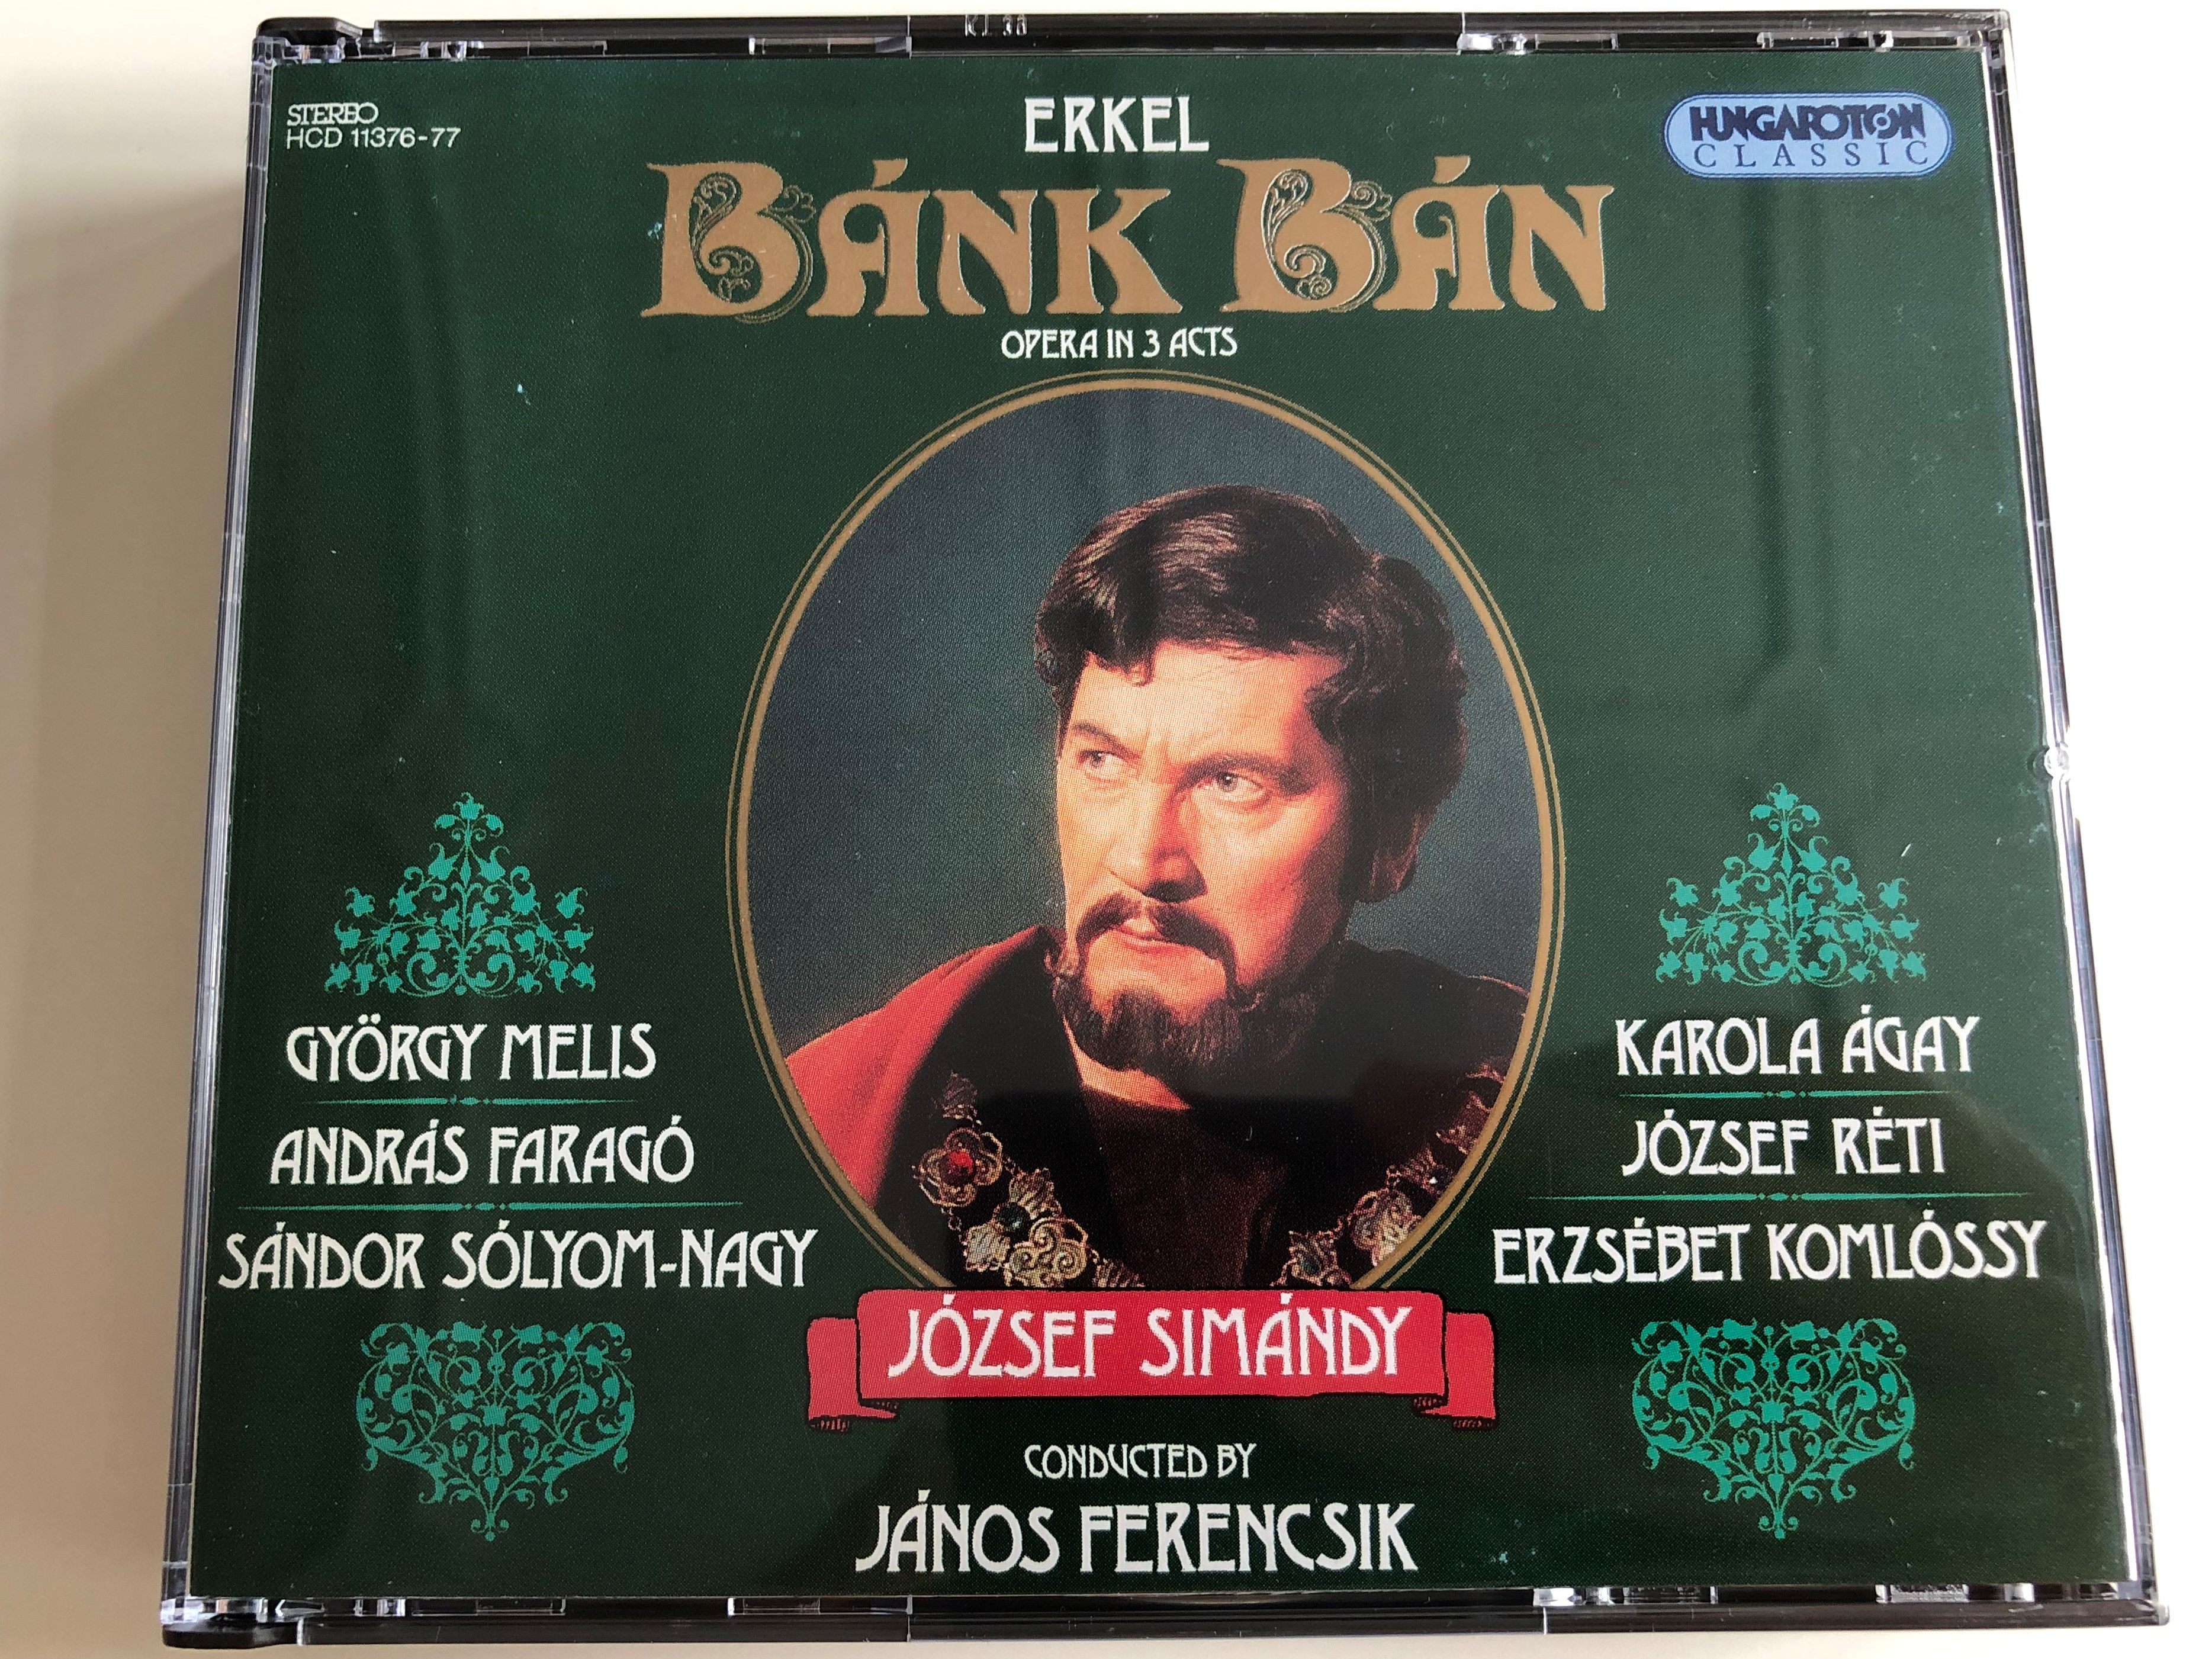 erkel-b-nk-b-n-opera-in-3-acts-2x-audio-cd-1994-j-zsef-sim-ndy-hungarian-state-opera-chorus-budapest-philharmonic-orchestra-conducted-by-j-nos-ferencsik-hungaroton-classic-hcd-11376-77-1-.jpg